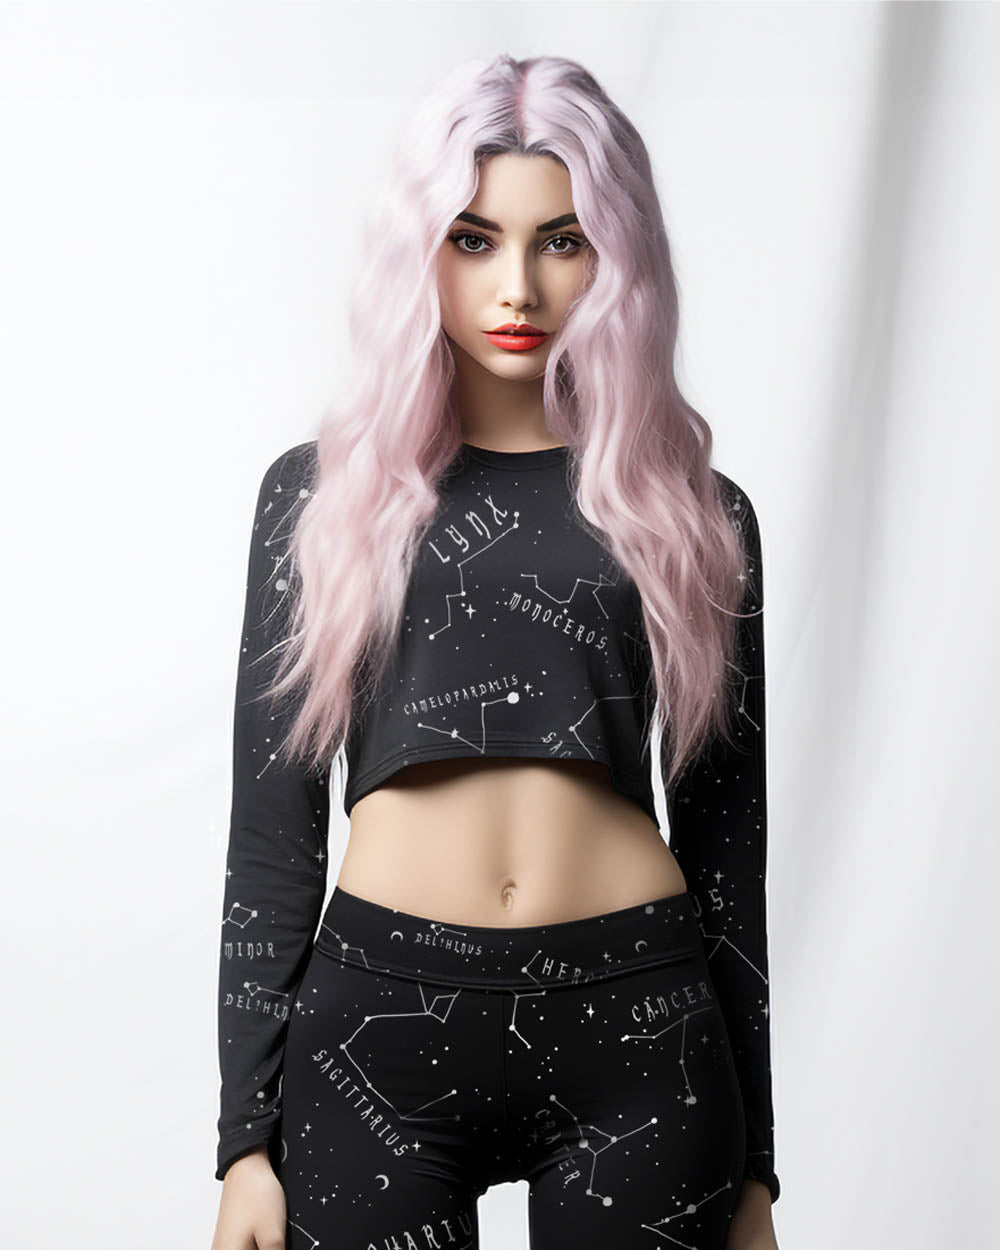 Stellar Long Sleeve Crop Top - Cute Witchy Constellations Top Pagan Gothic Style Leisurewear UPF 50+ Protection